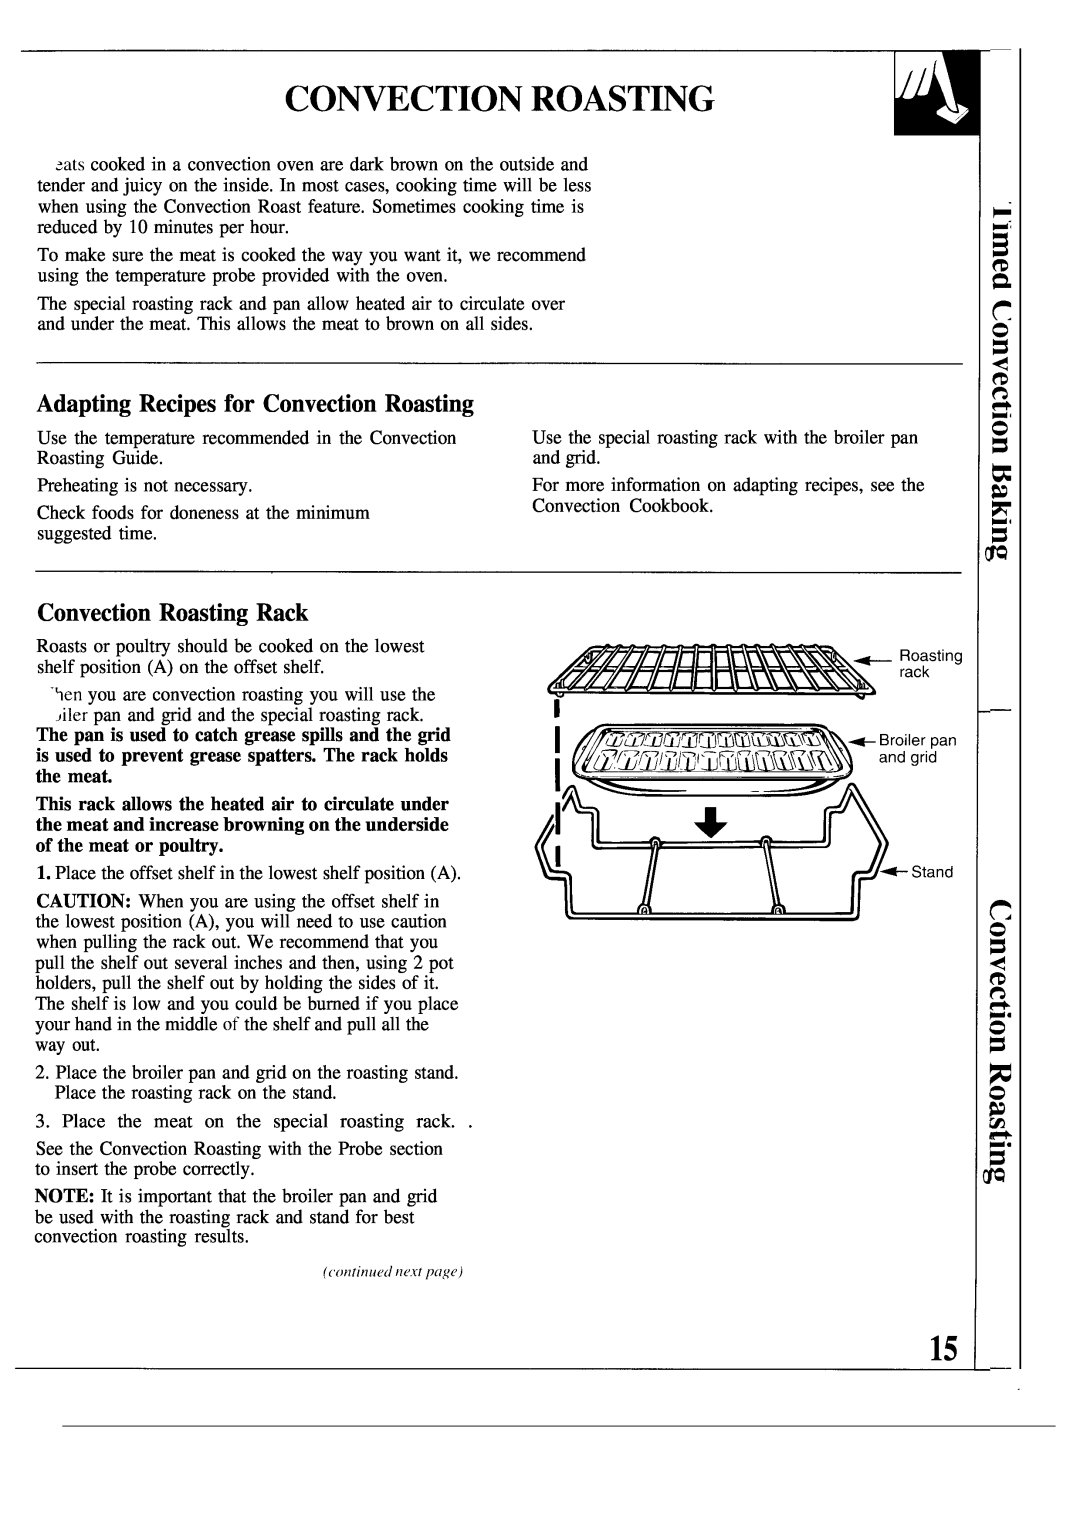 GE MNU099, JKP17 warranty Adapting Recipes for Convection Roasting, Convection Roasting Rack 